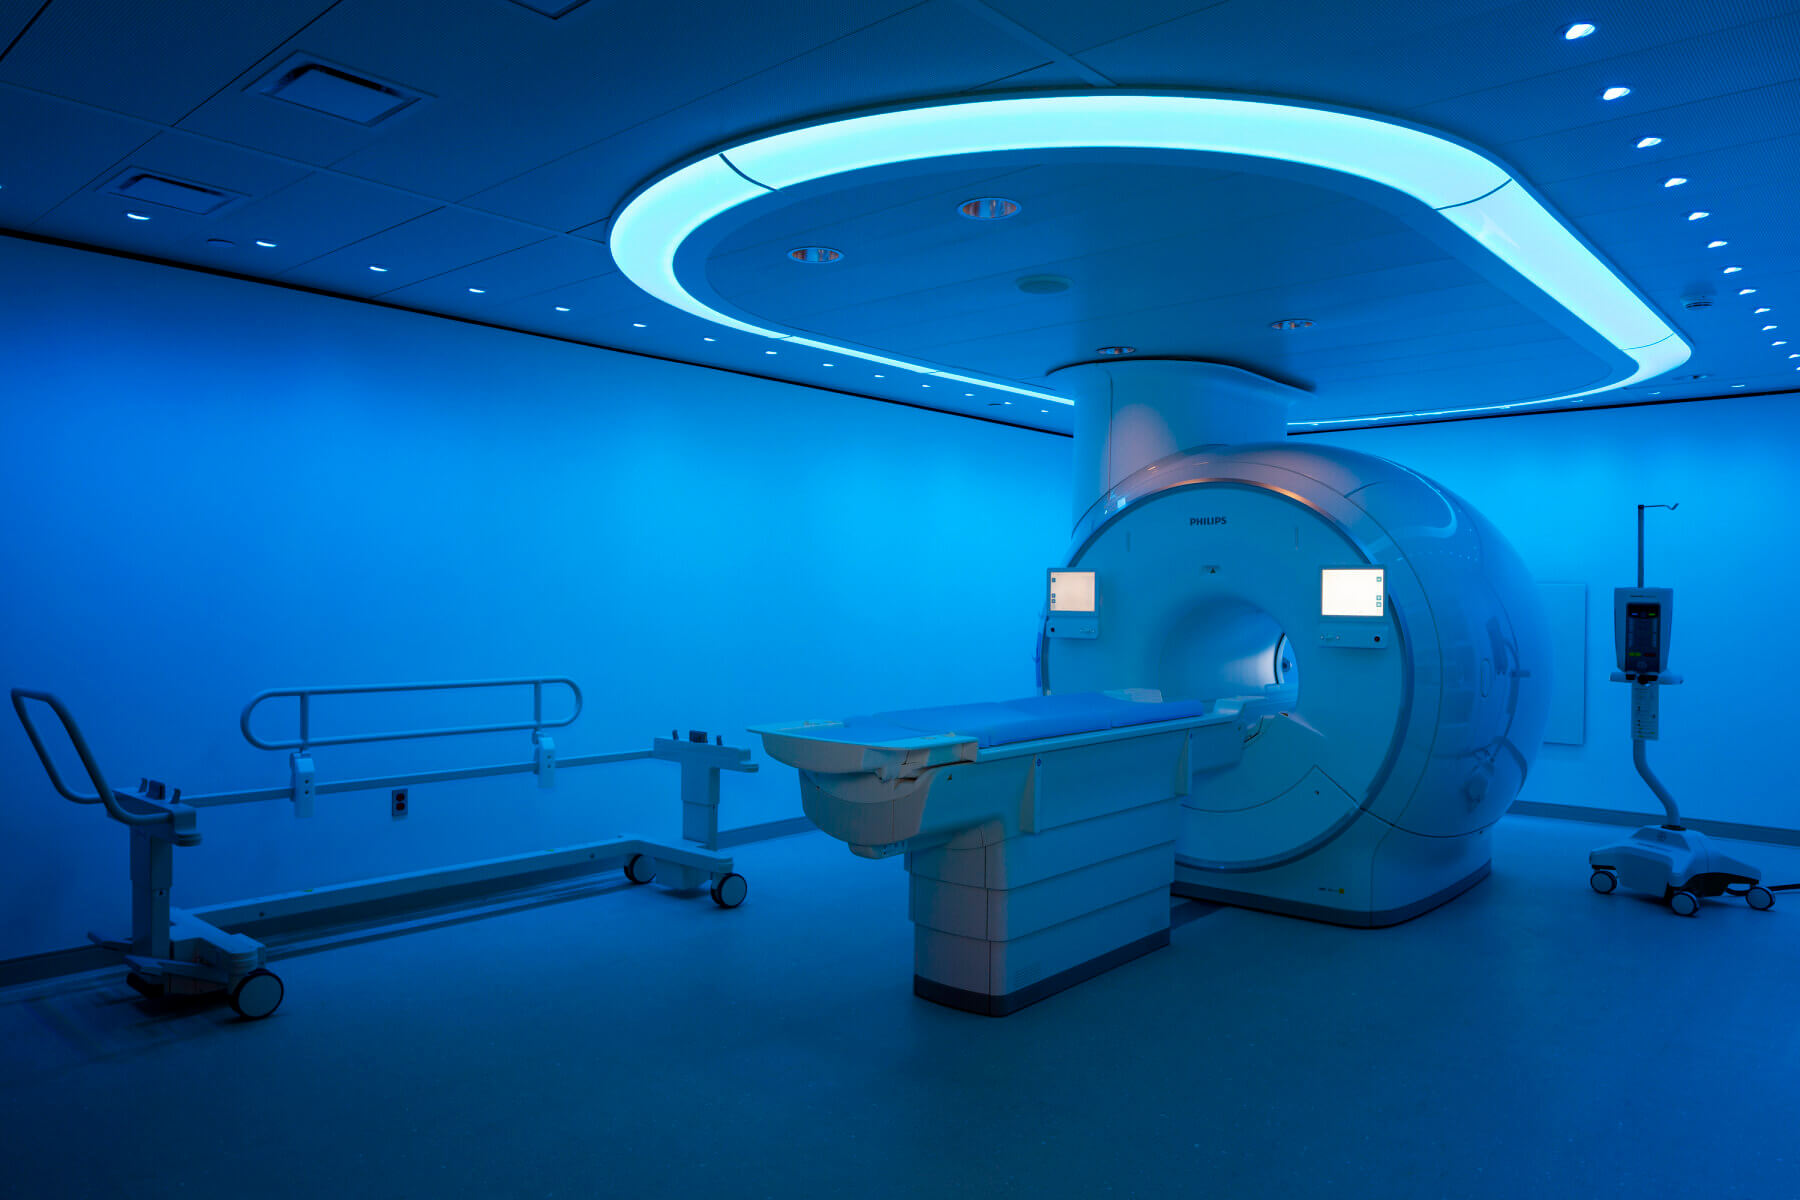 CAT scan machine in the center of a room with vibrant blue lighting